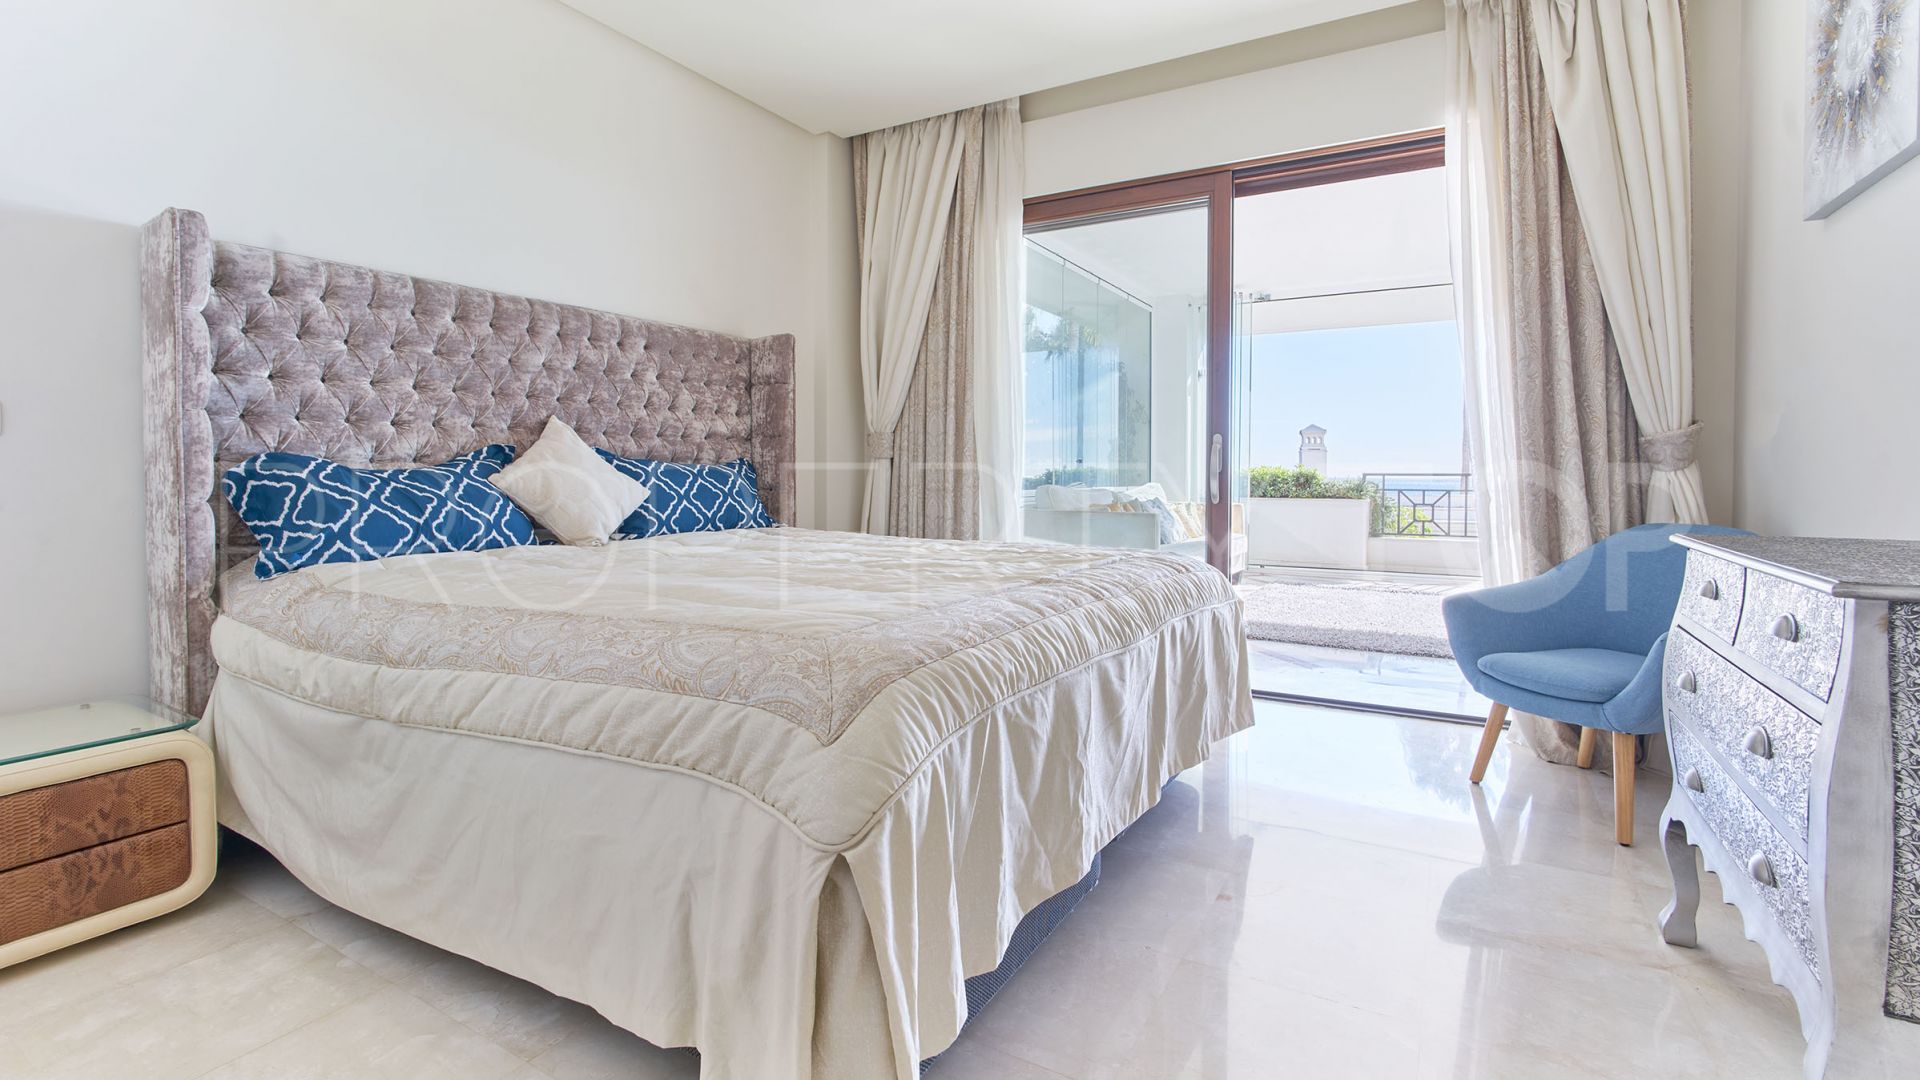 3 bedrooms flat for sale in Doncella Beach